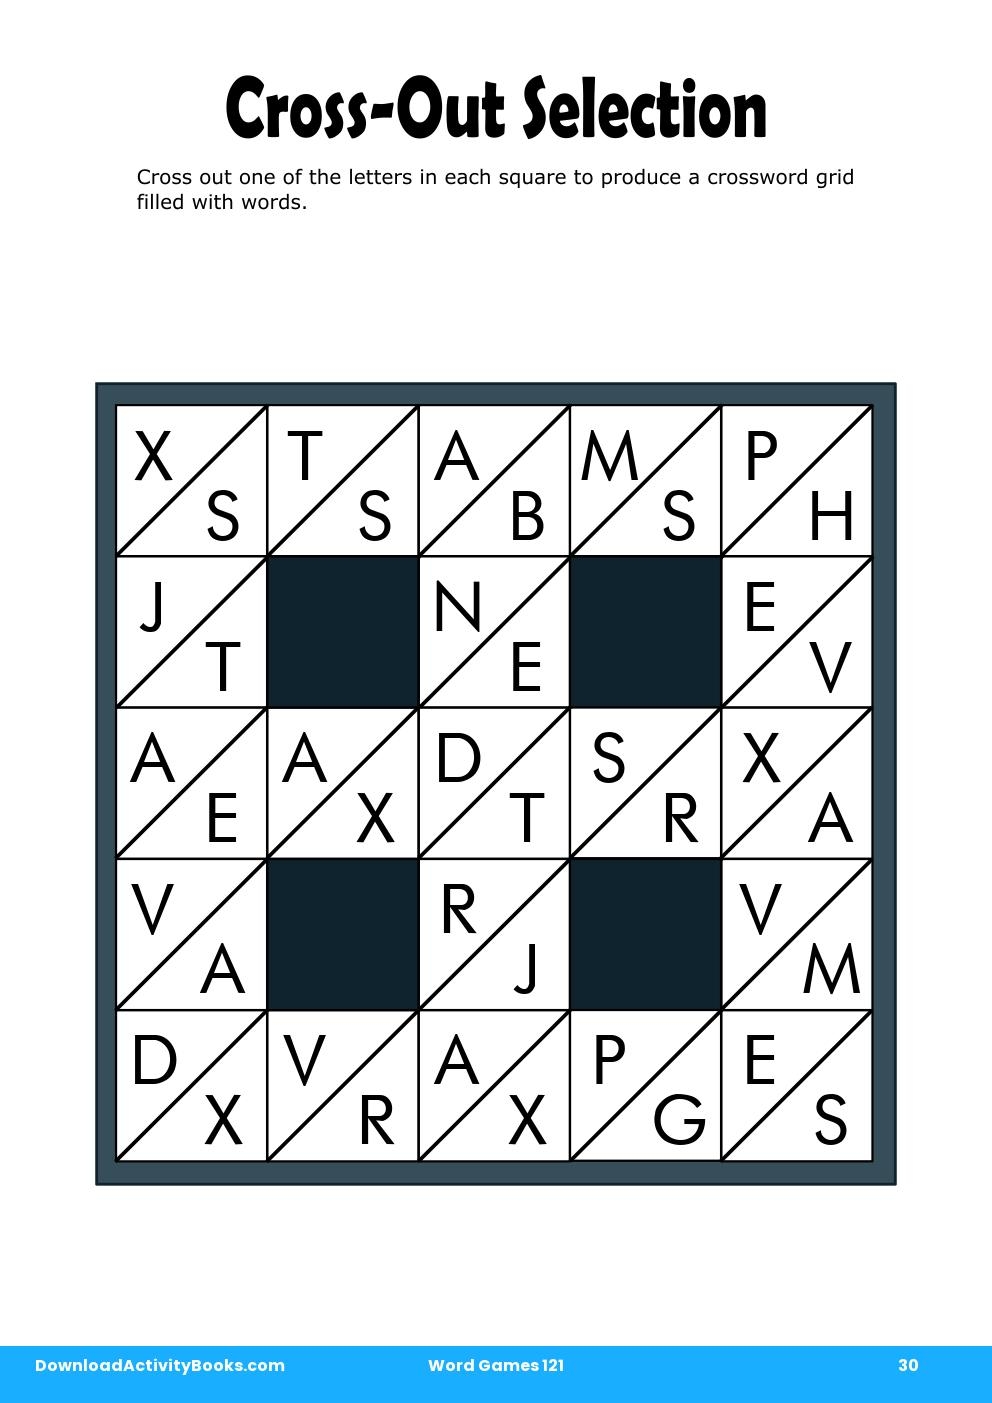 Cross-Out Selection in Word Games 121